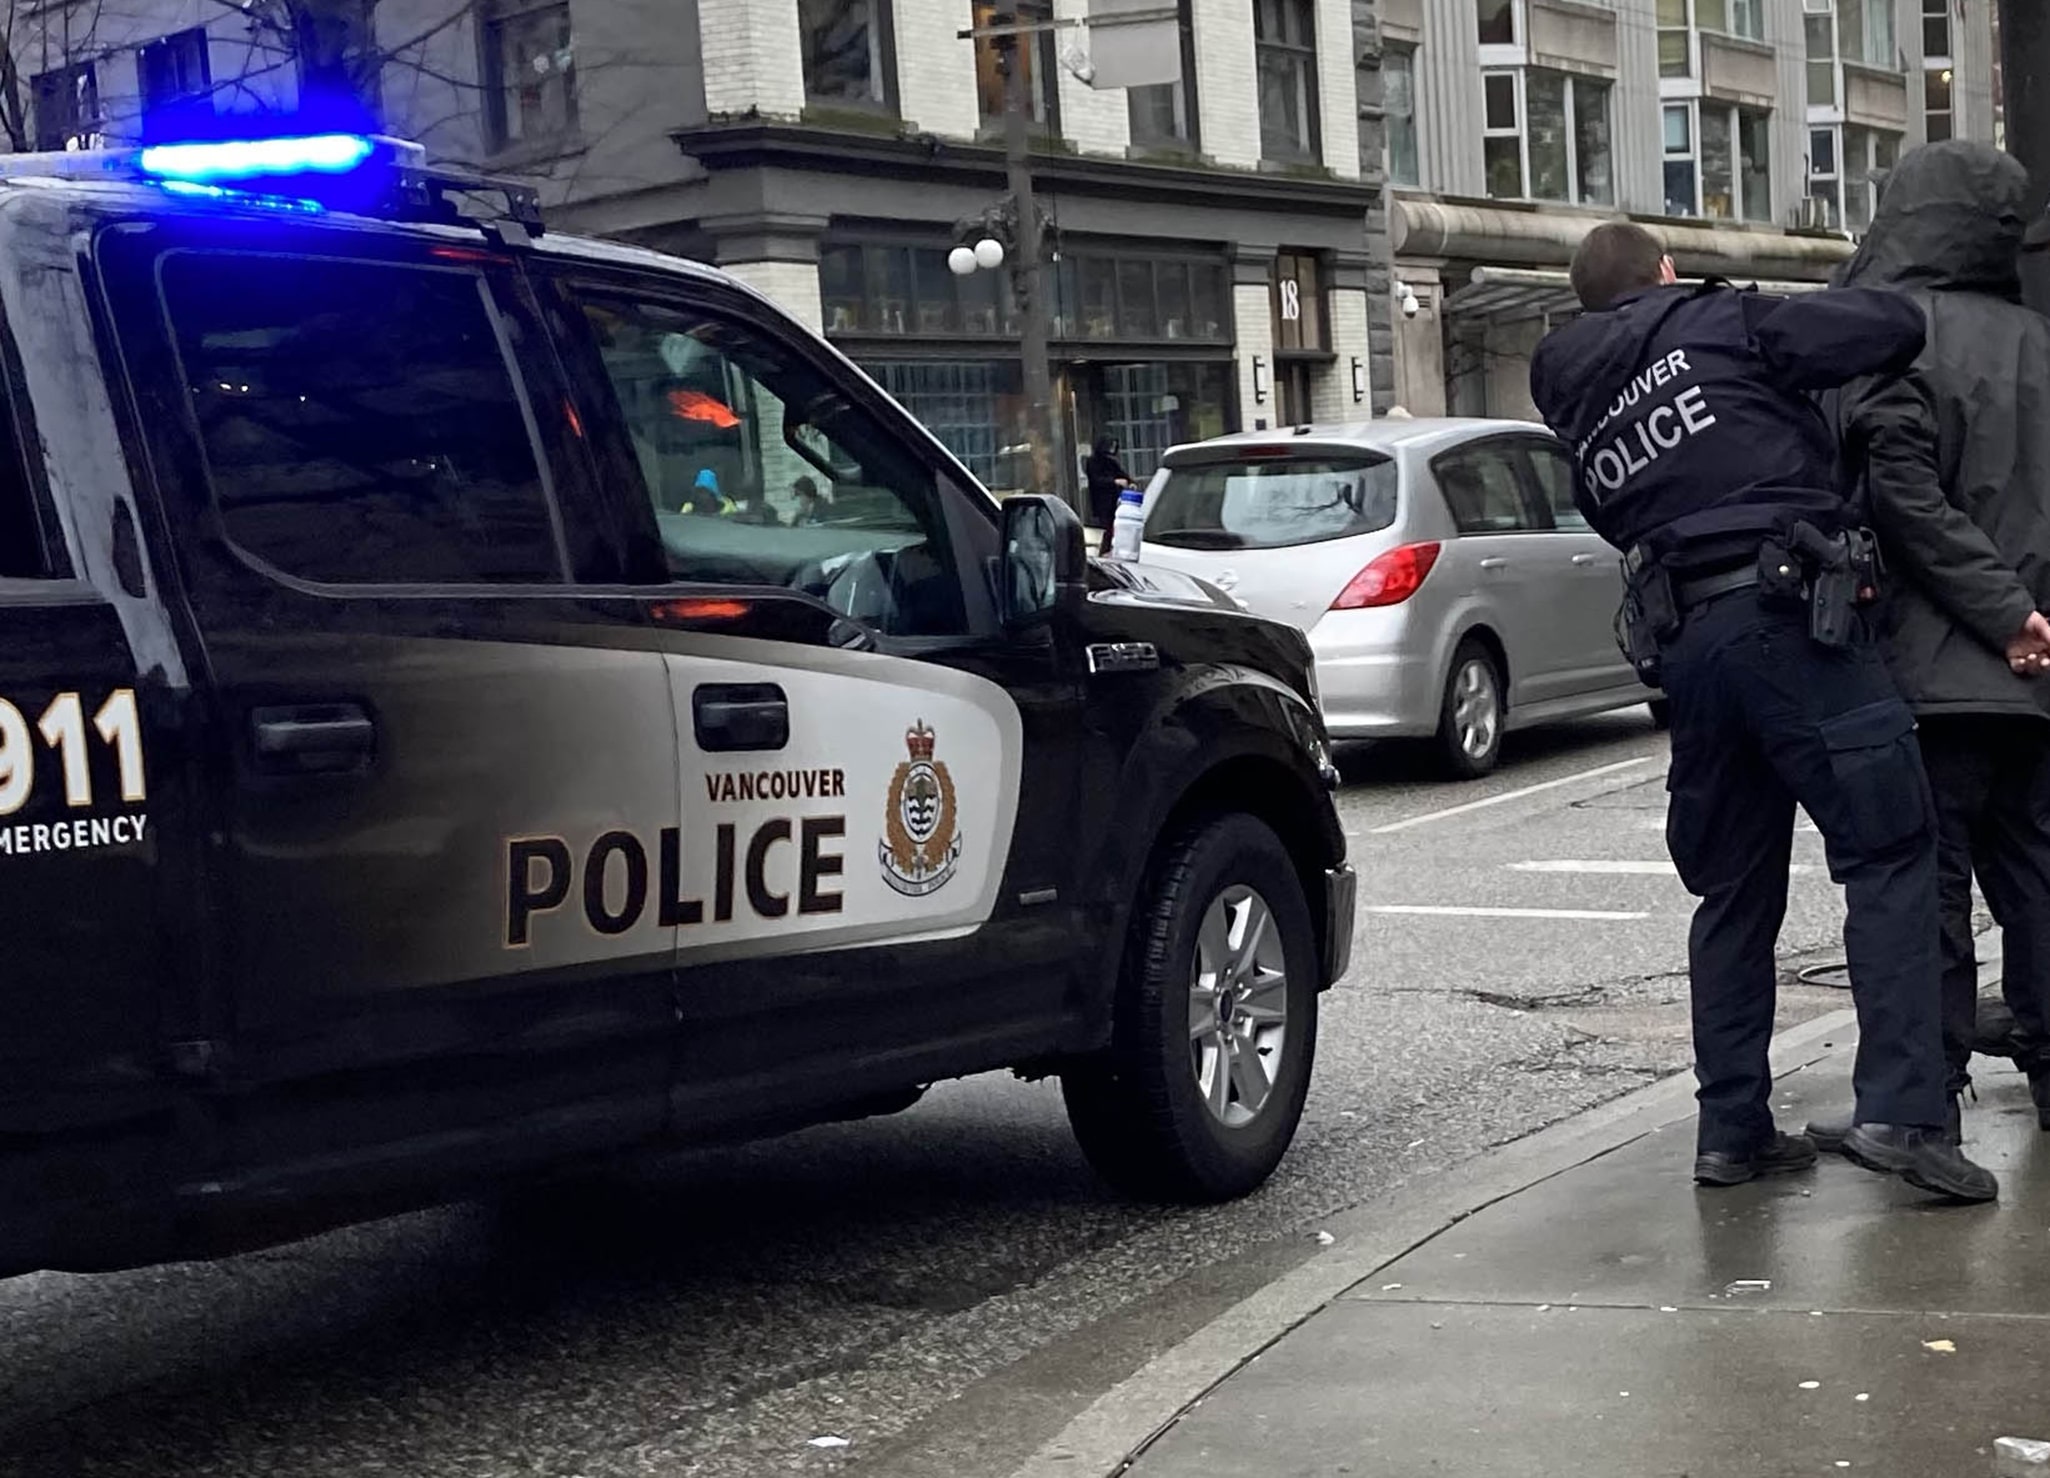 Vancouver police truck parked on side of the road while officer is arresting someone